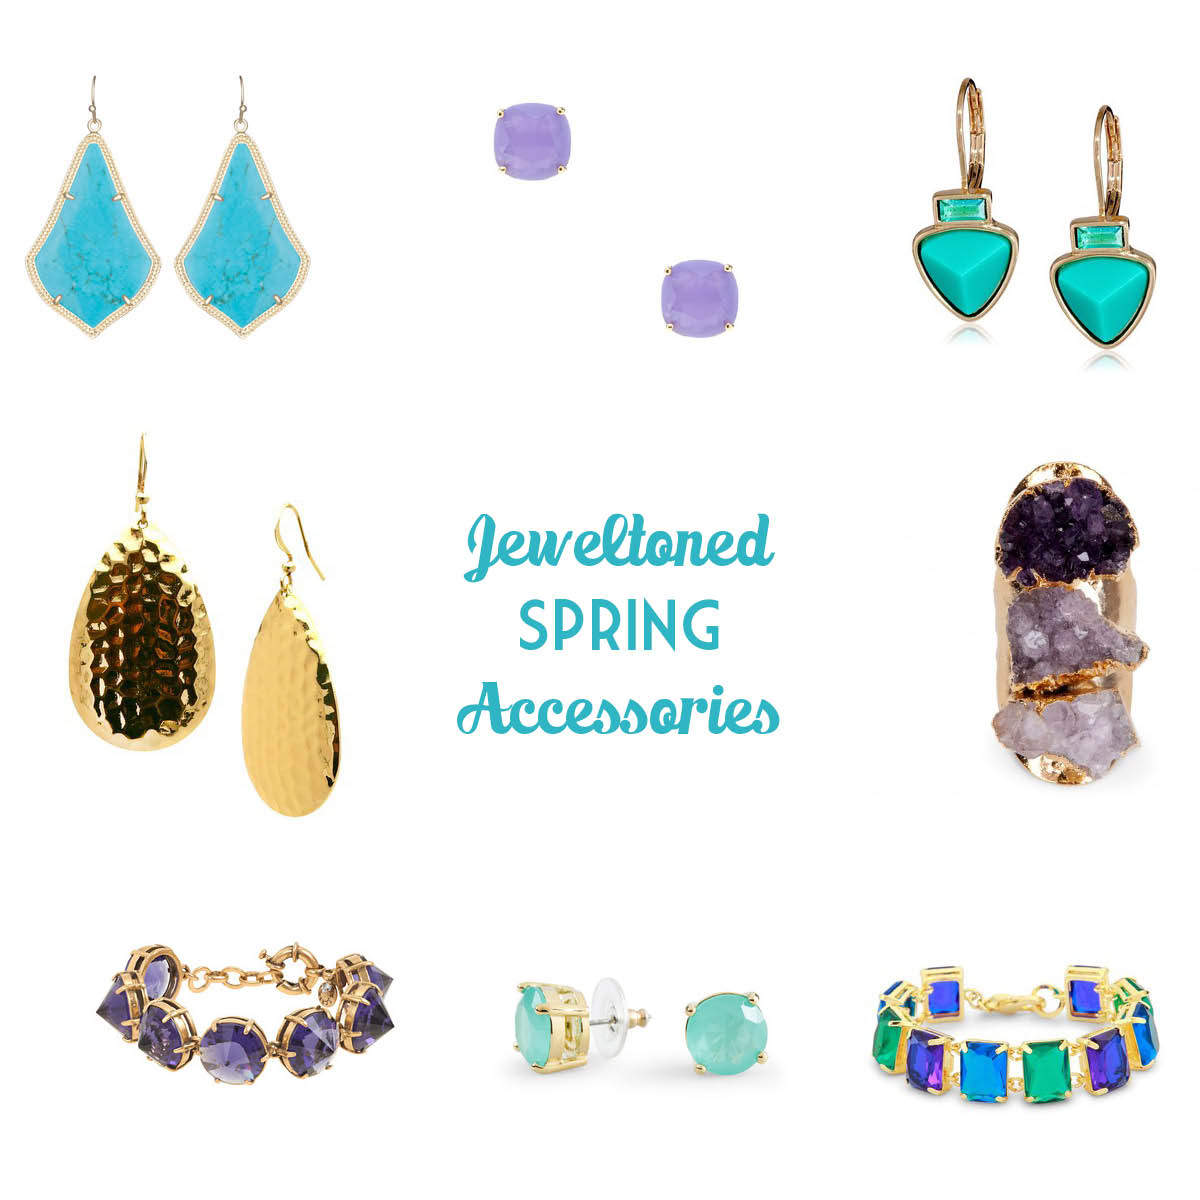 Jewel-toned Spring Accessories on A Few of My Favorite Things